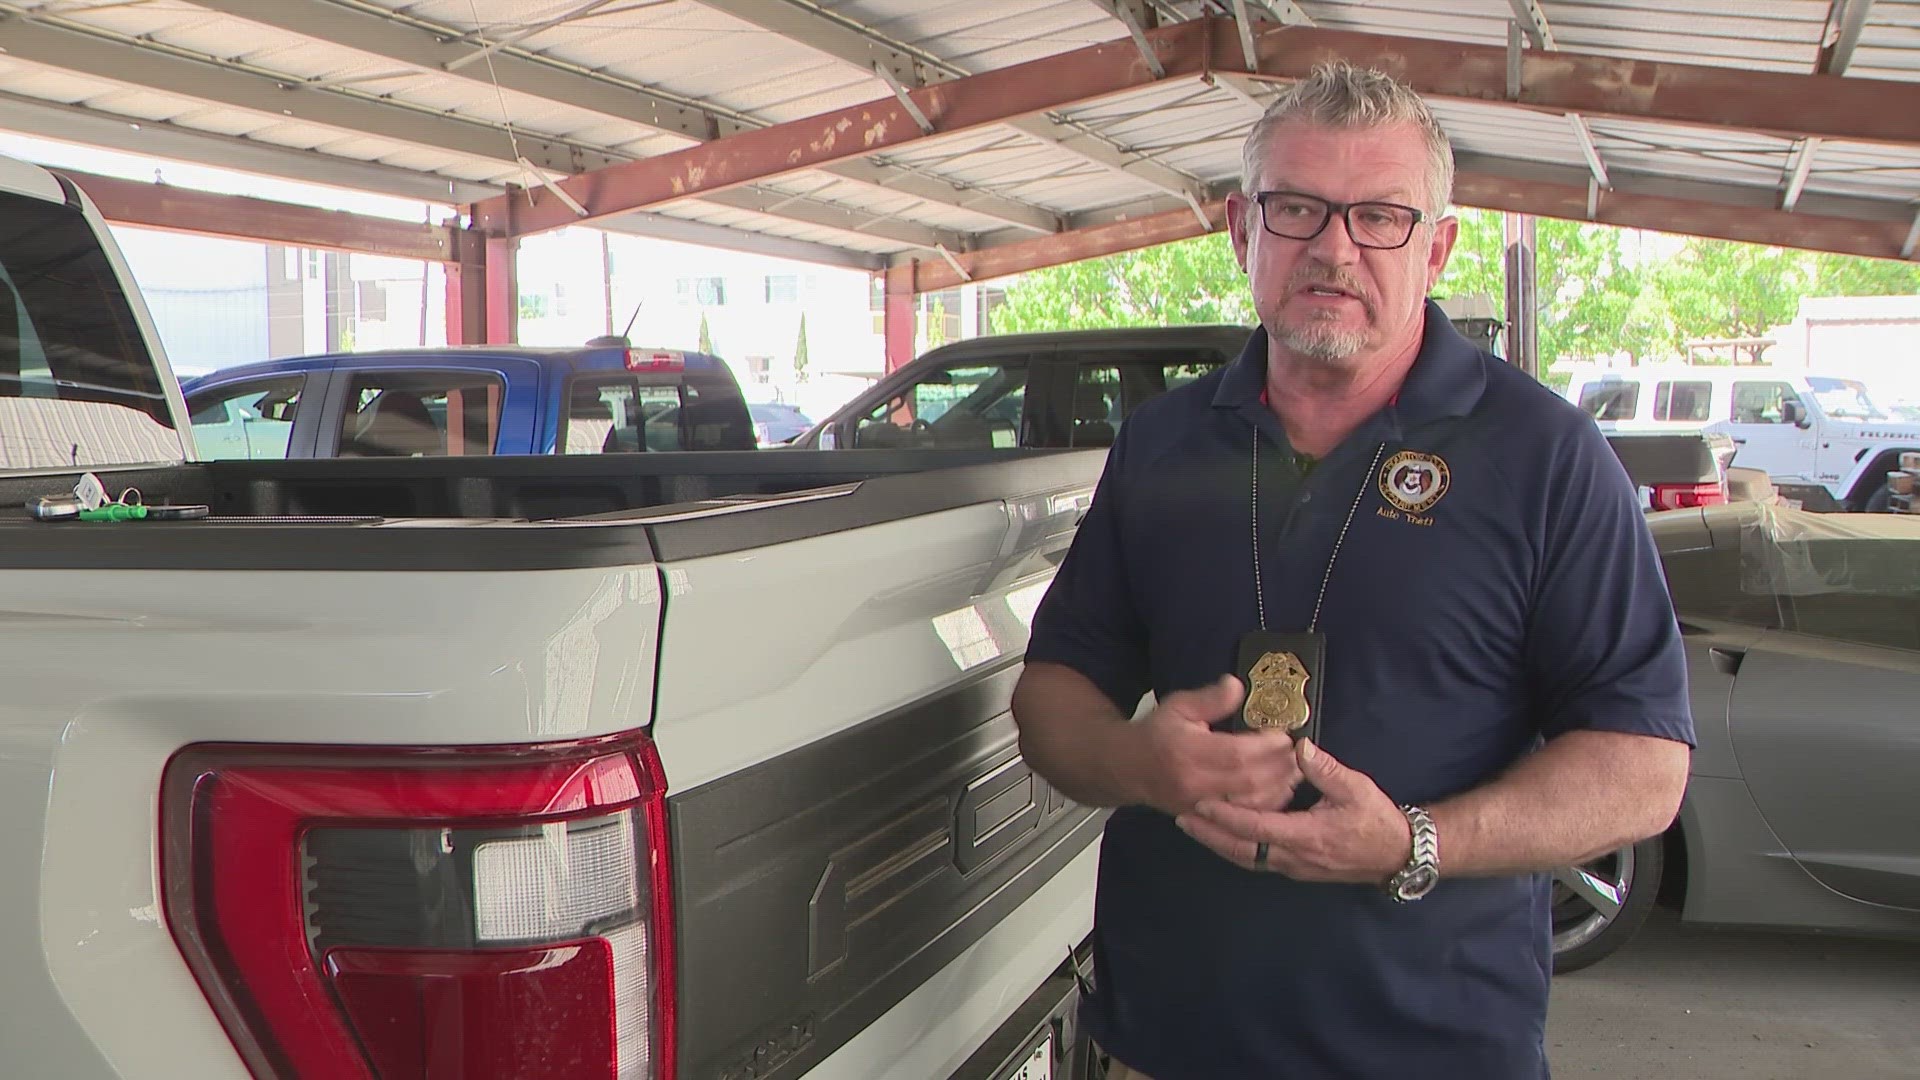 KHOU 11's Ugochi Iloka spoke with an expert on how truck owners can protect their property.